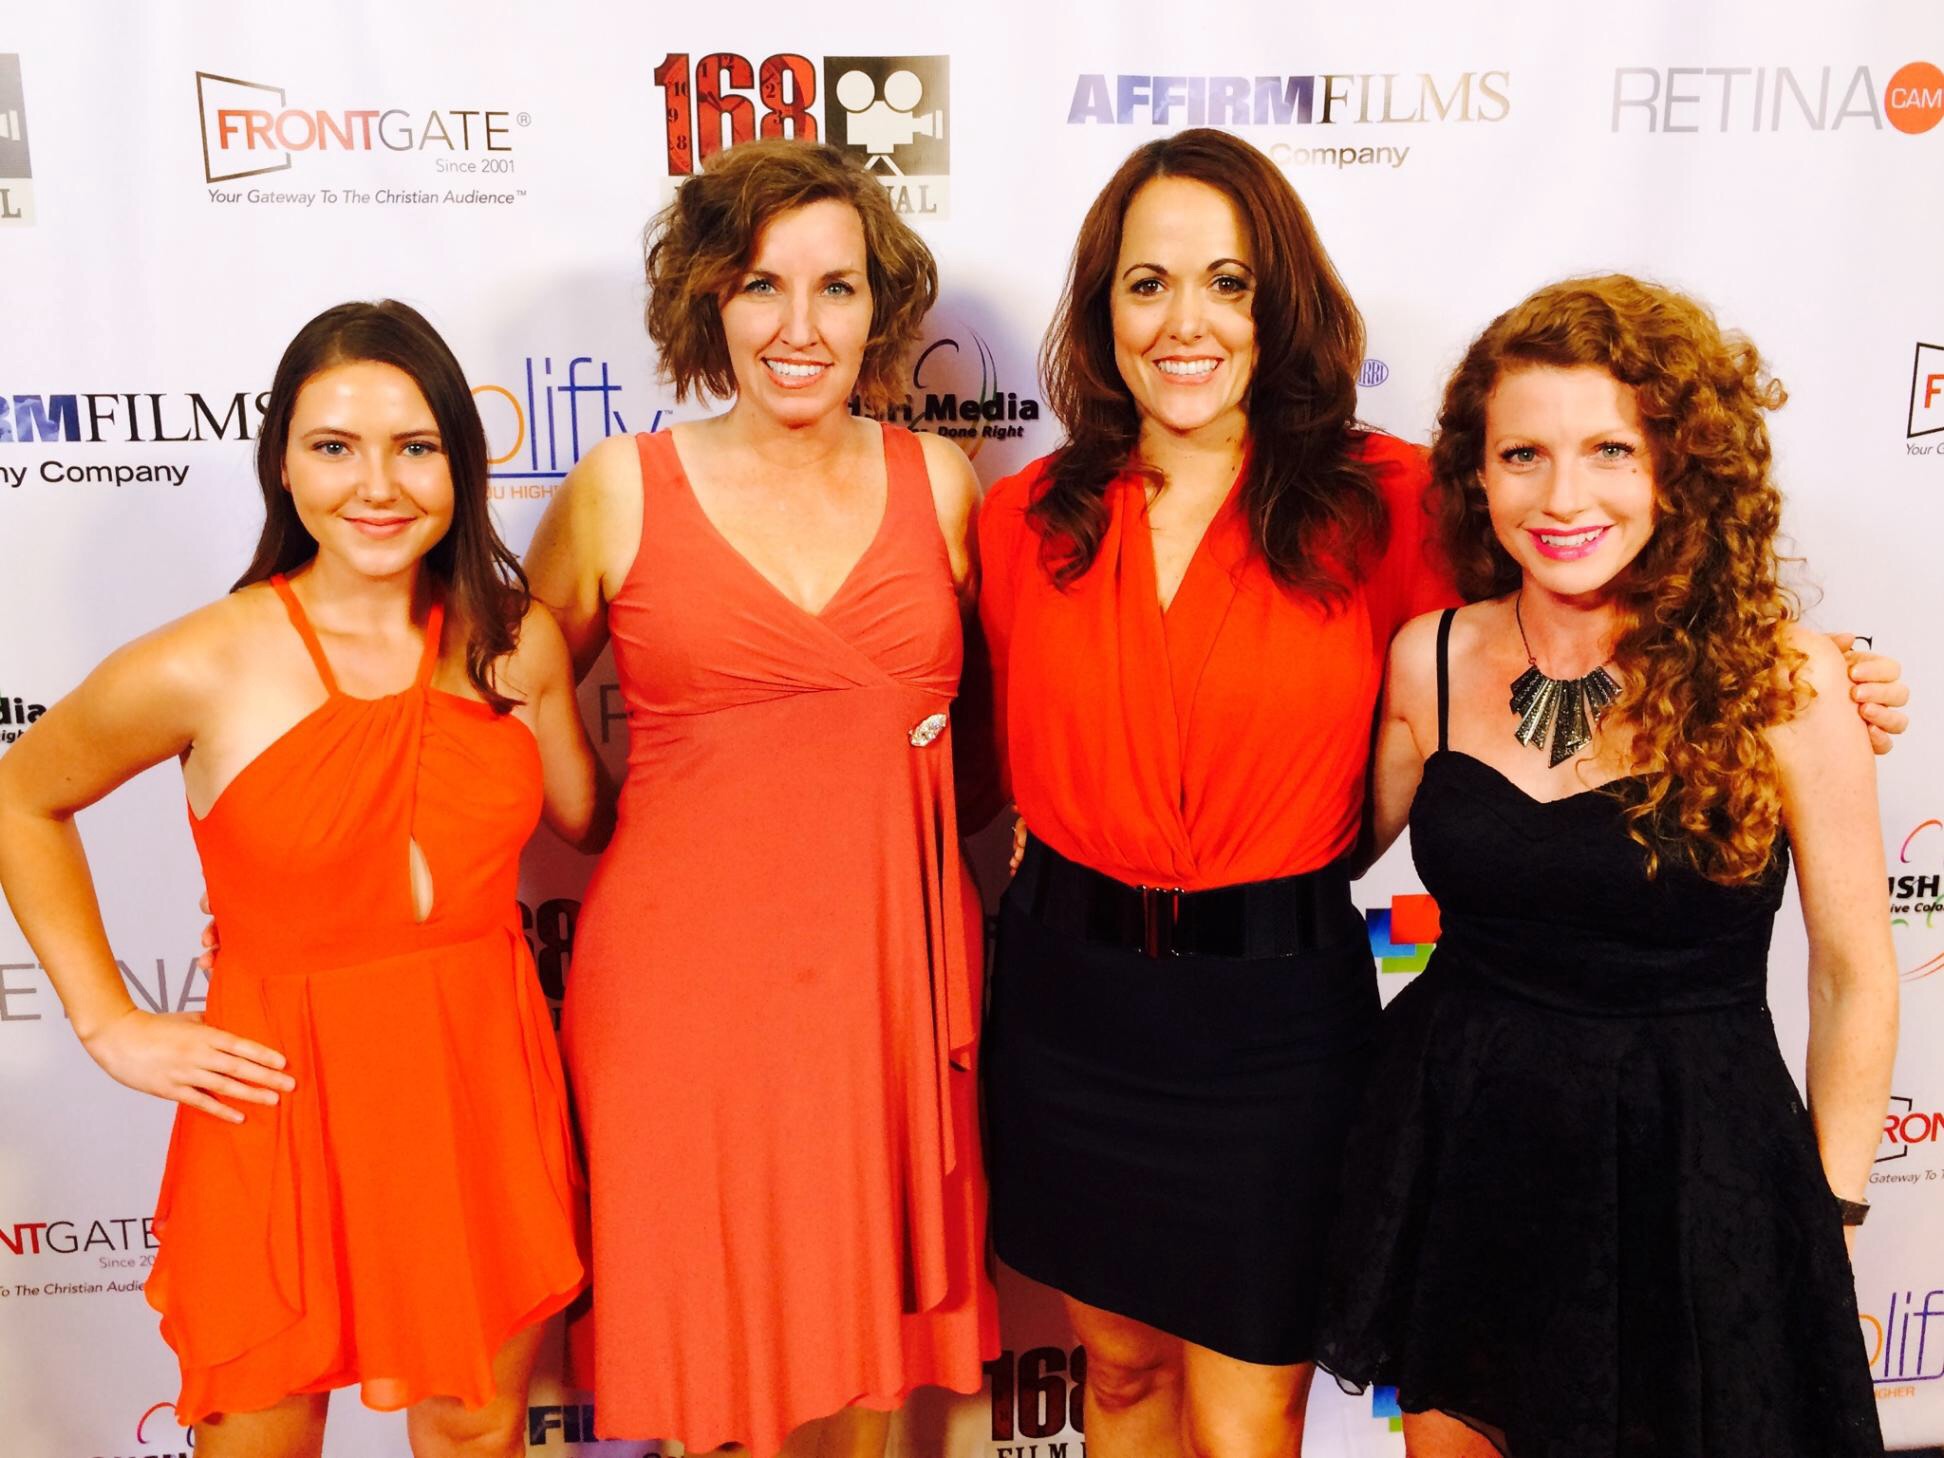 Actress Samantha Hodges, Heidi Appe, & Amber Alexander with Director Stephanie Wiseman @ 2015 168 Film Festival for 